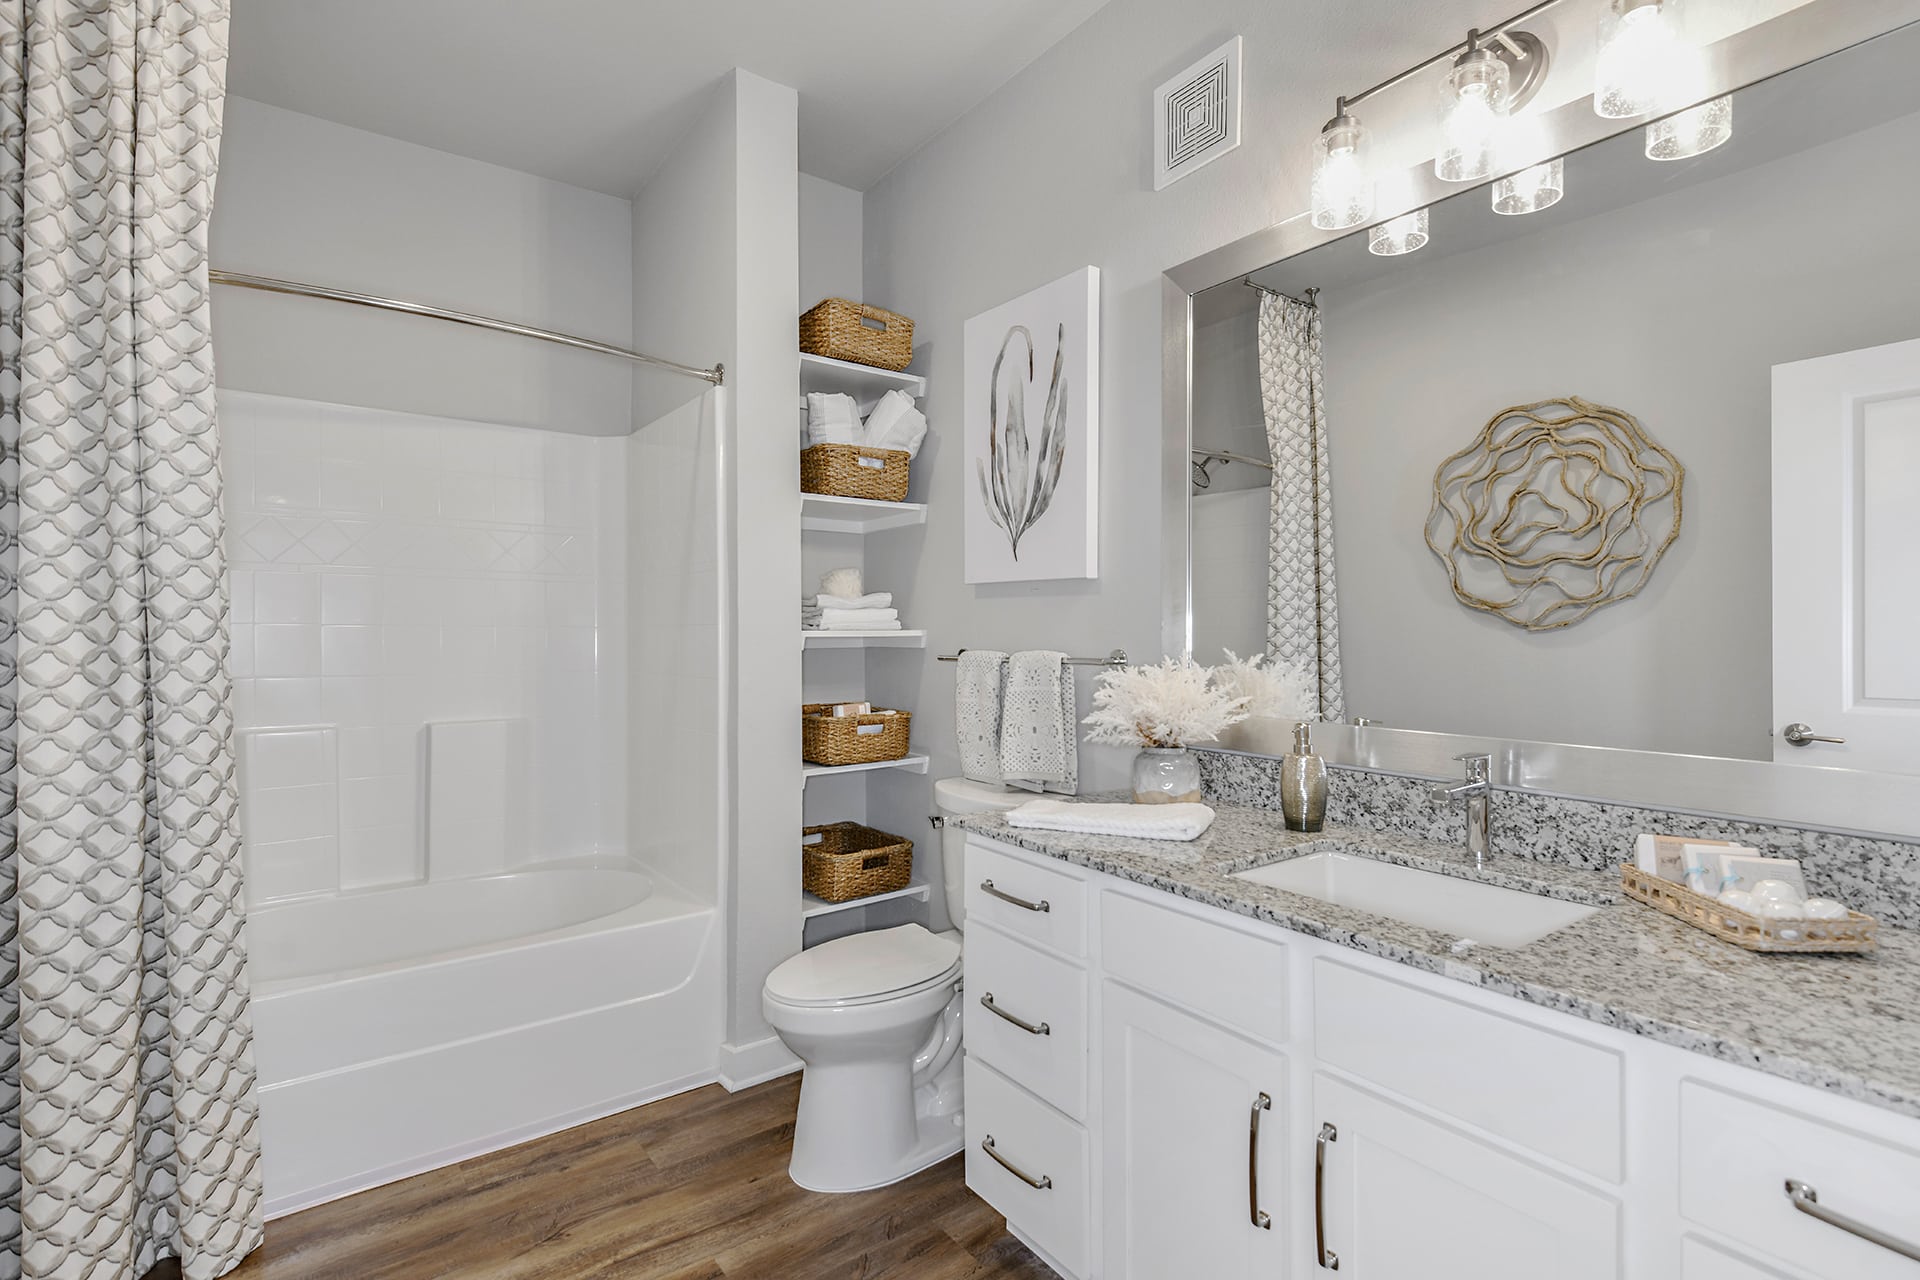 A bathroom with white cabinets and hardwood floors.